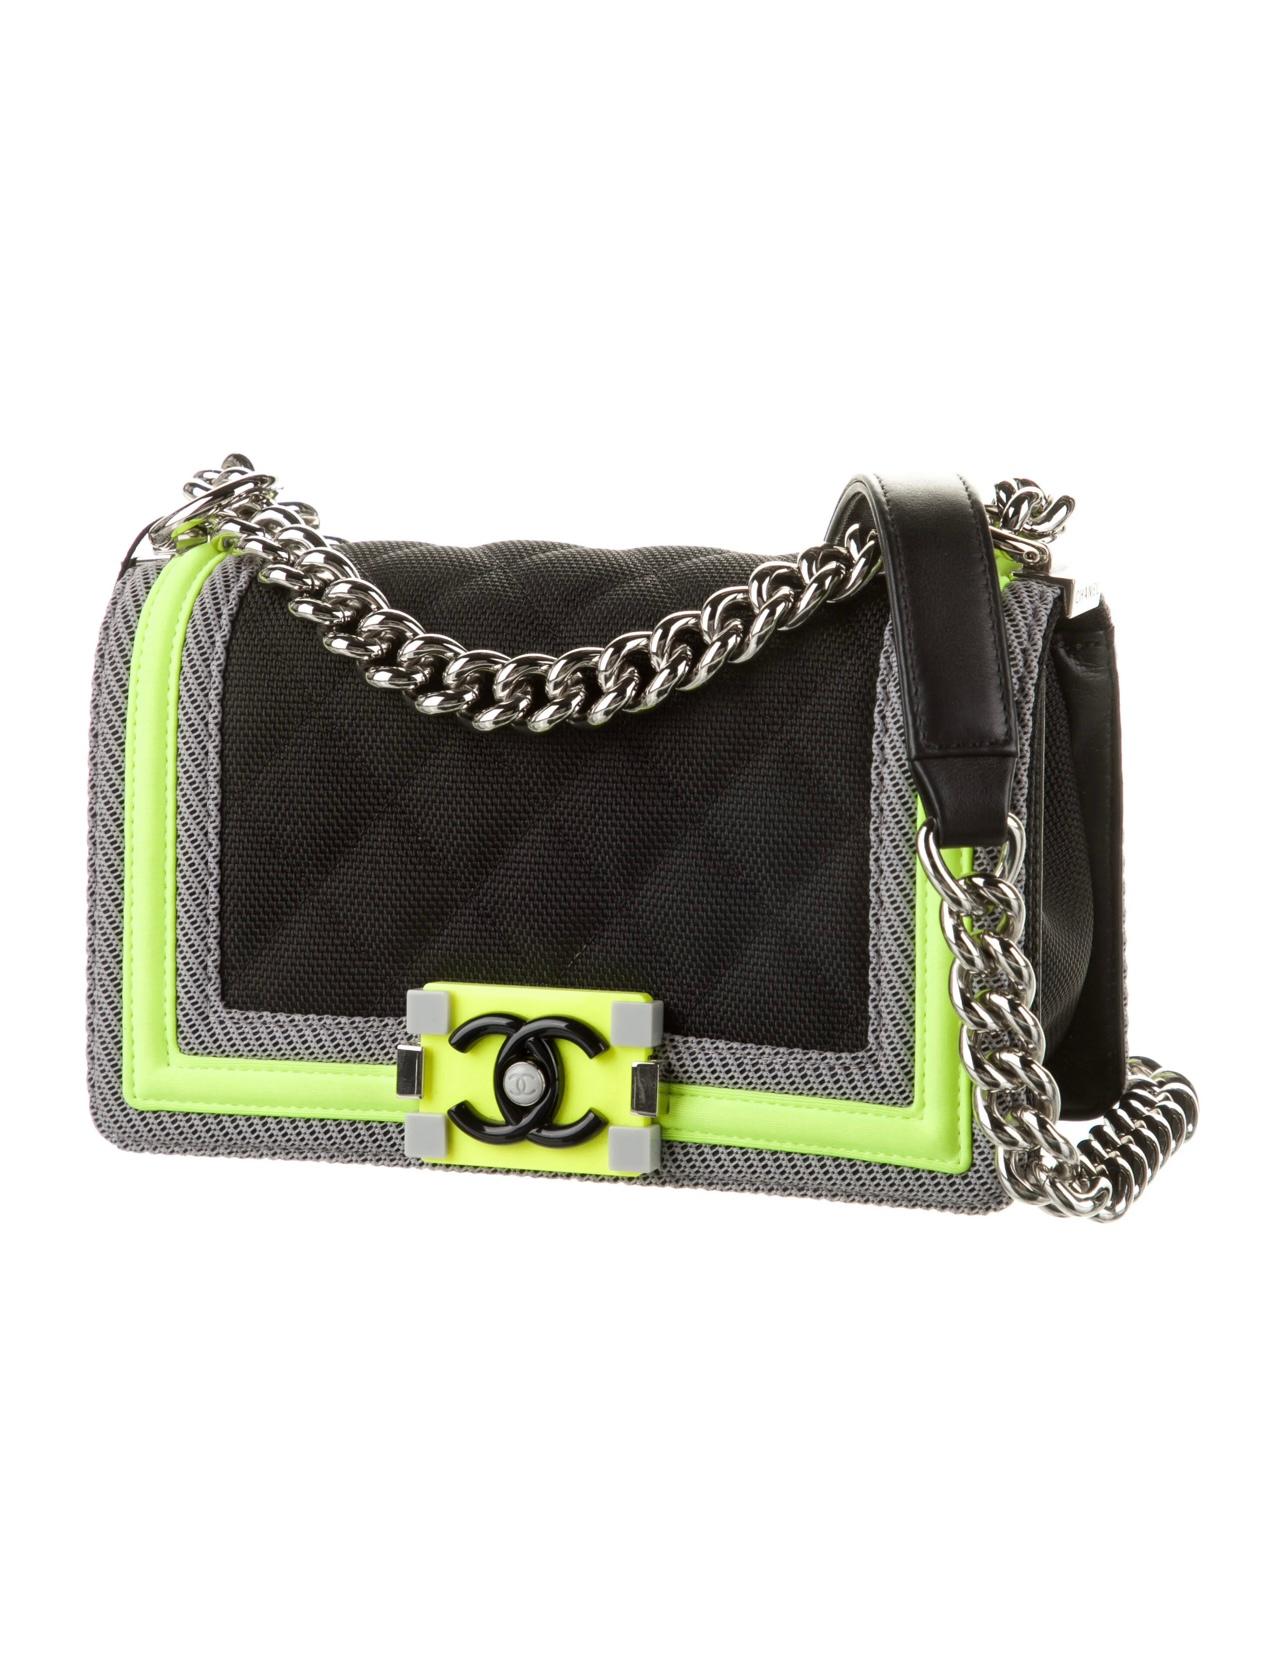 Chanel Limited Edition Spring 2016 RTW  Small Neon Lime Sport Boy Bag

Year: 2016 Spring Ready to Wear
Chain-link strap
Silver-tone hardware accents.
Boy push-lock closure
Black fluo nylon interior
Interior slip pocket
8